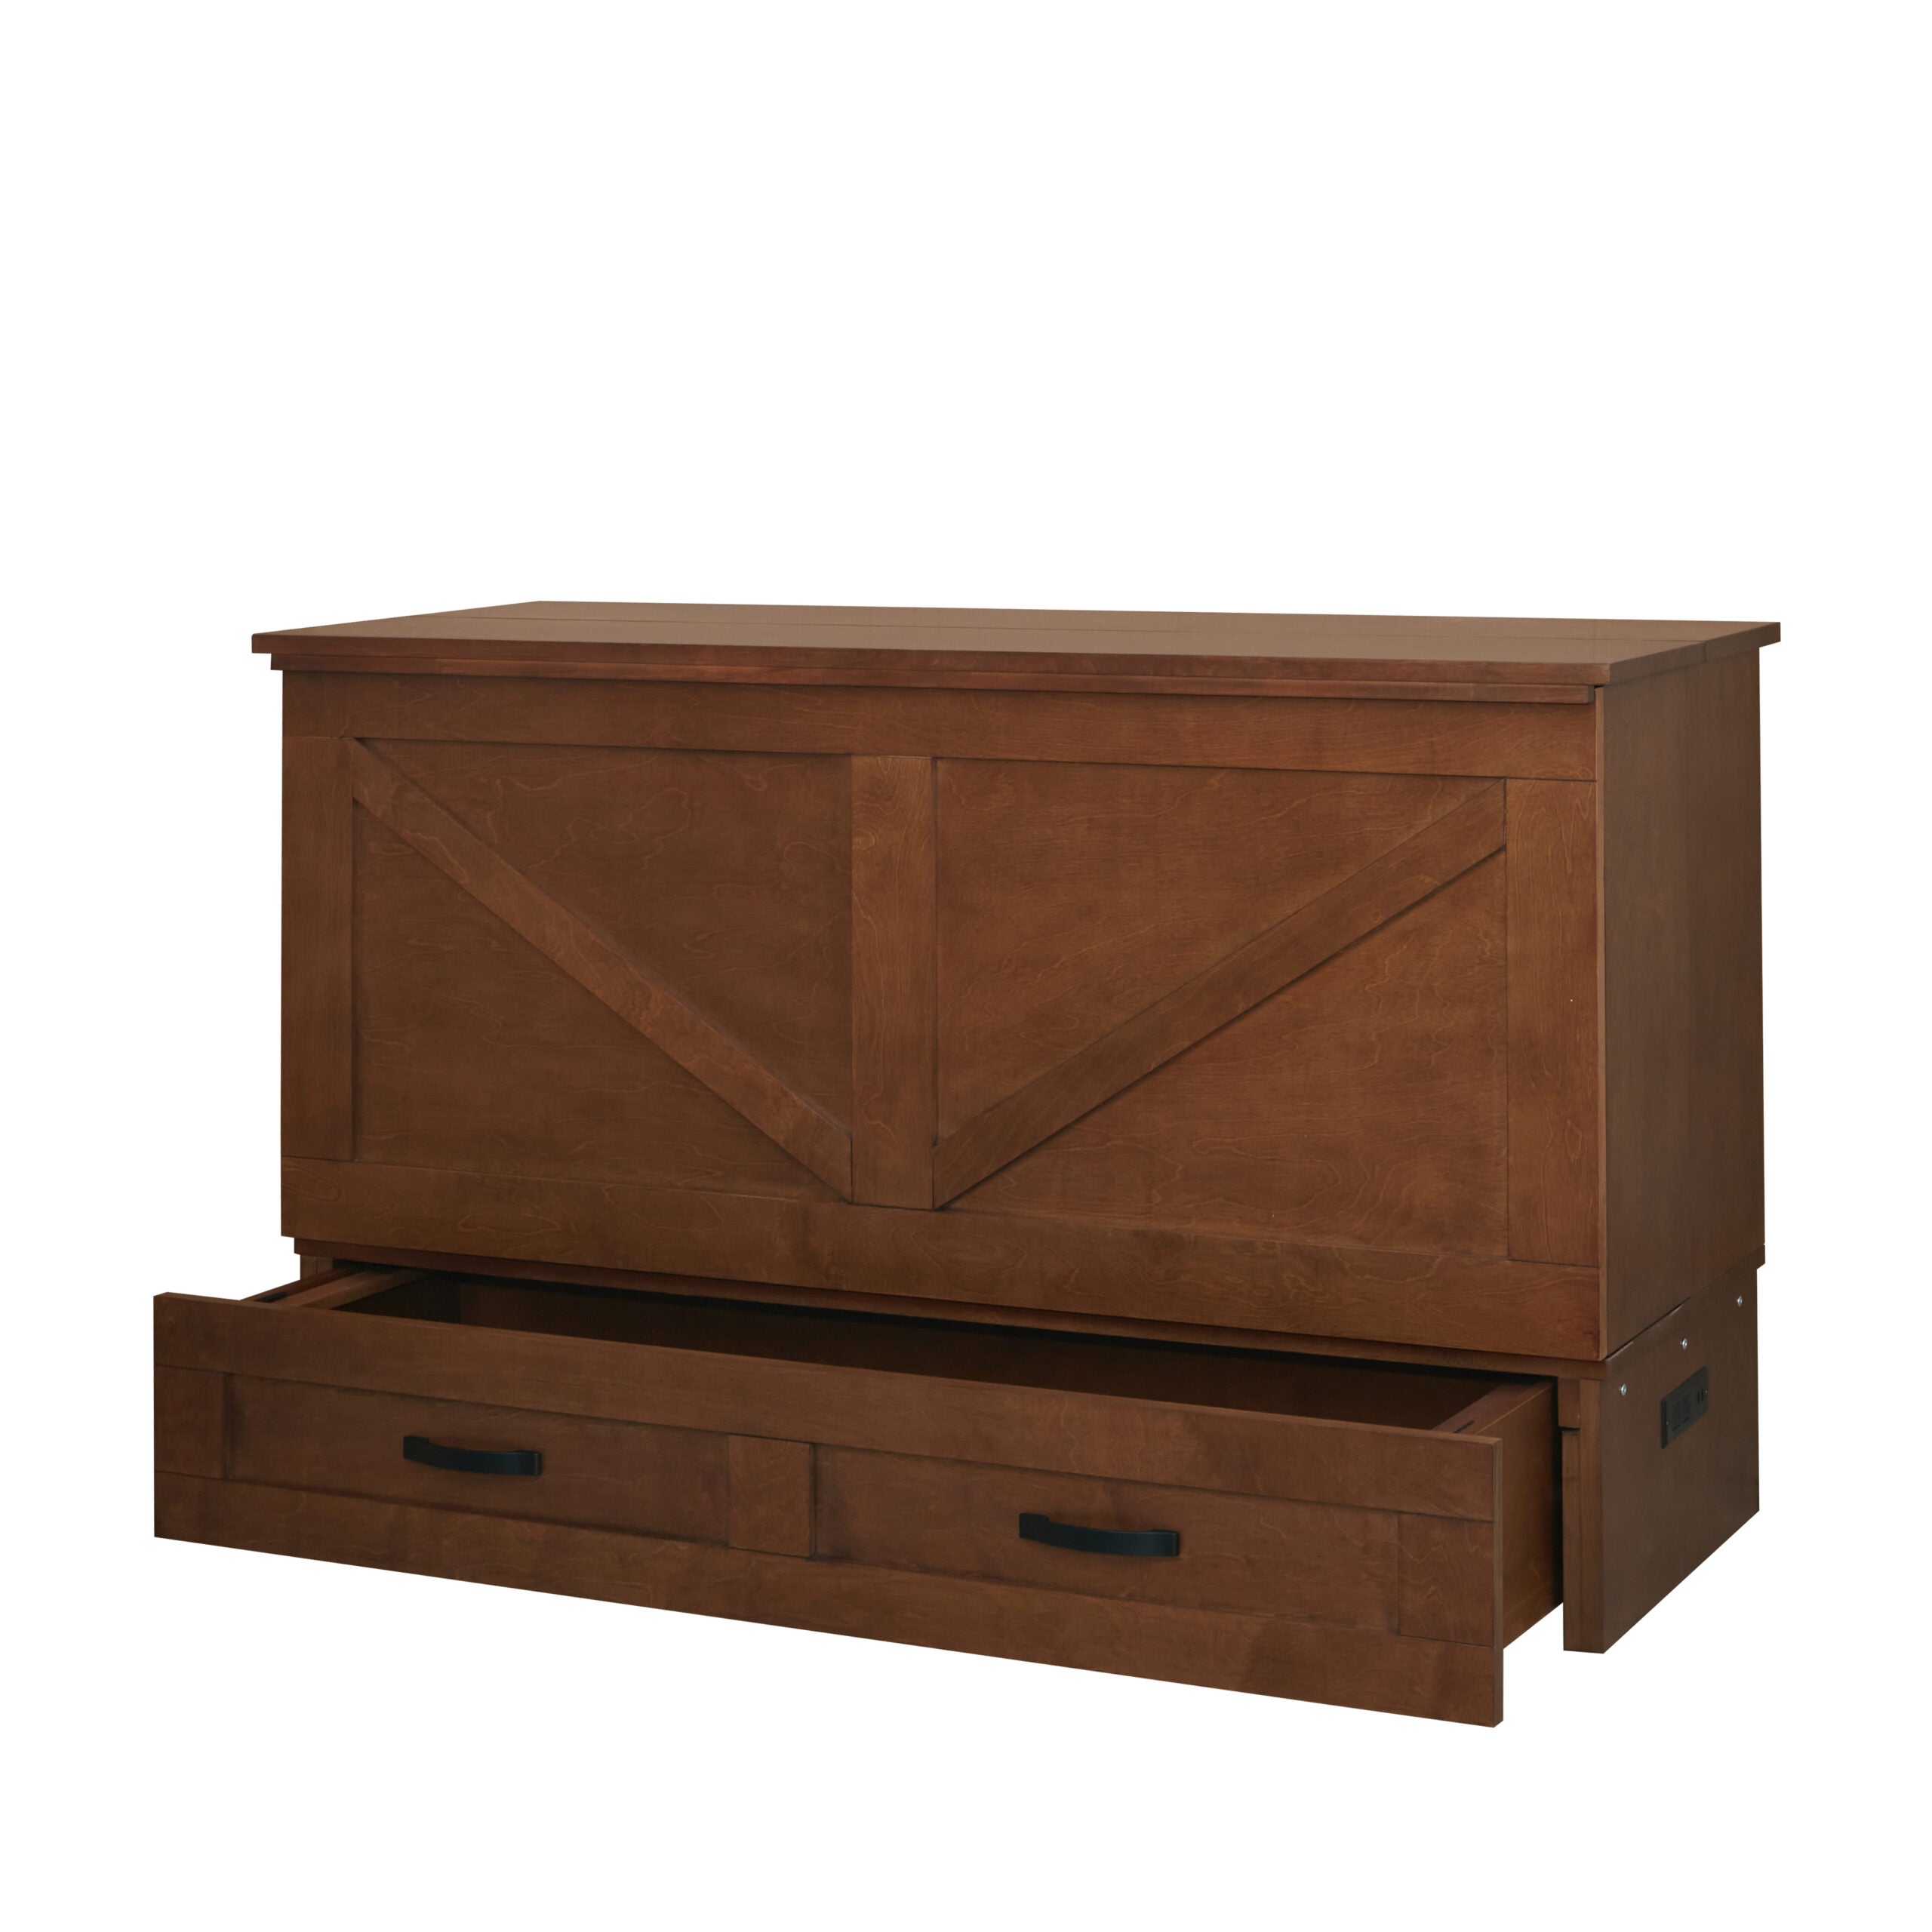 Cottage Cabinet Bed in Cojoba with Drawer Open